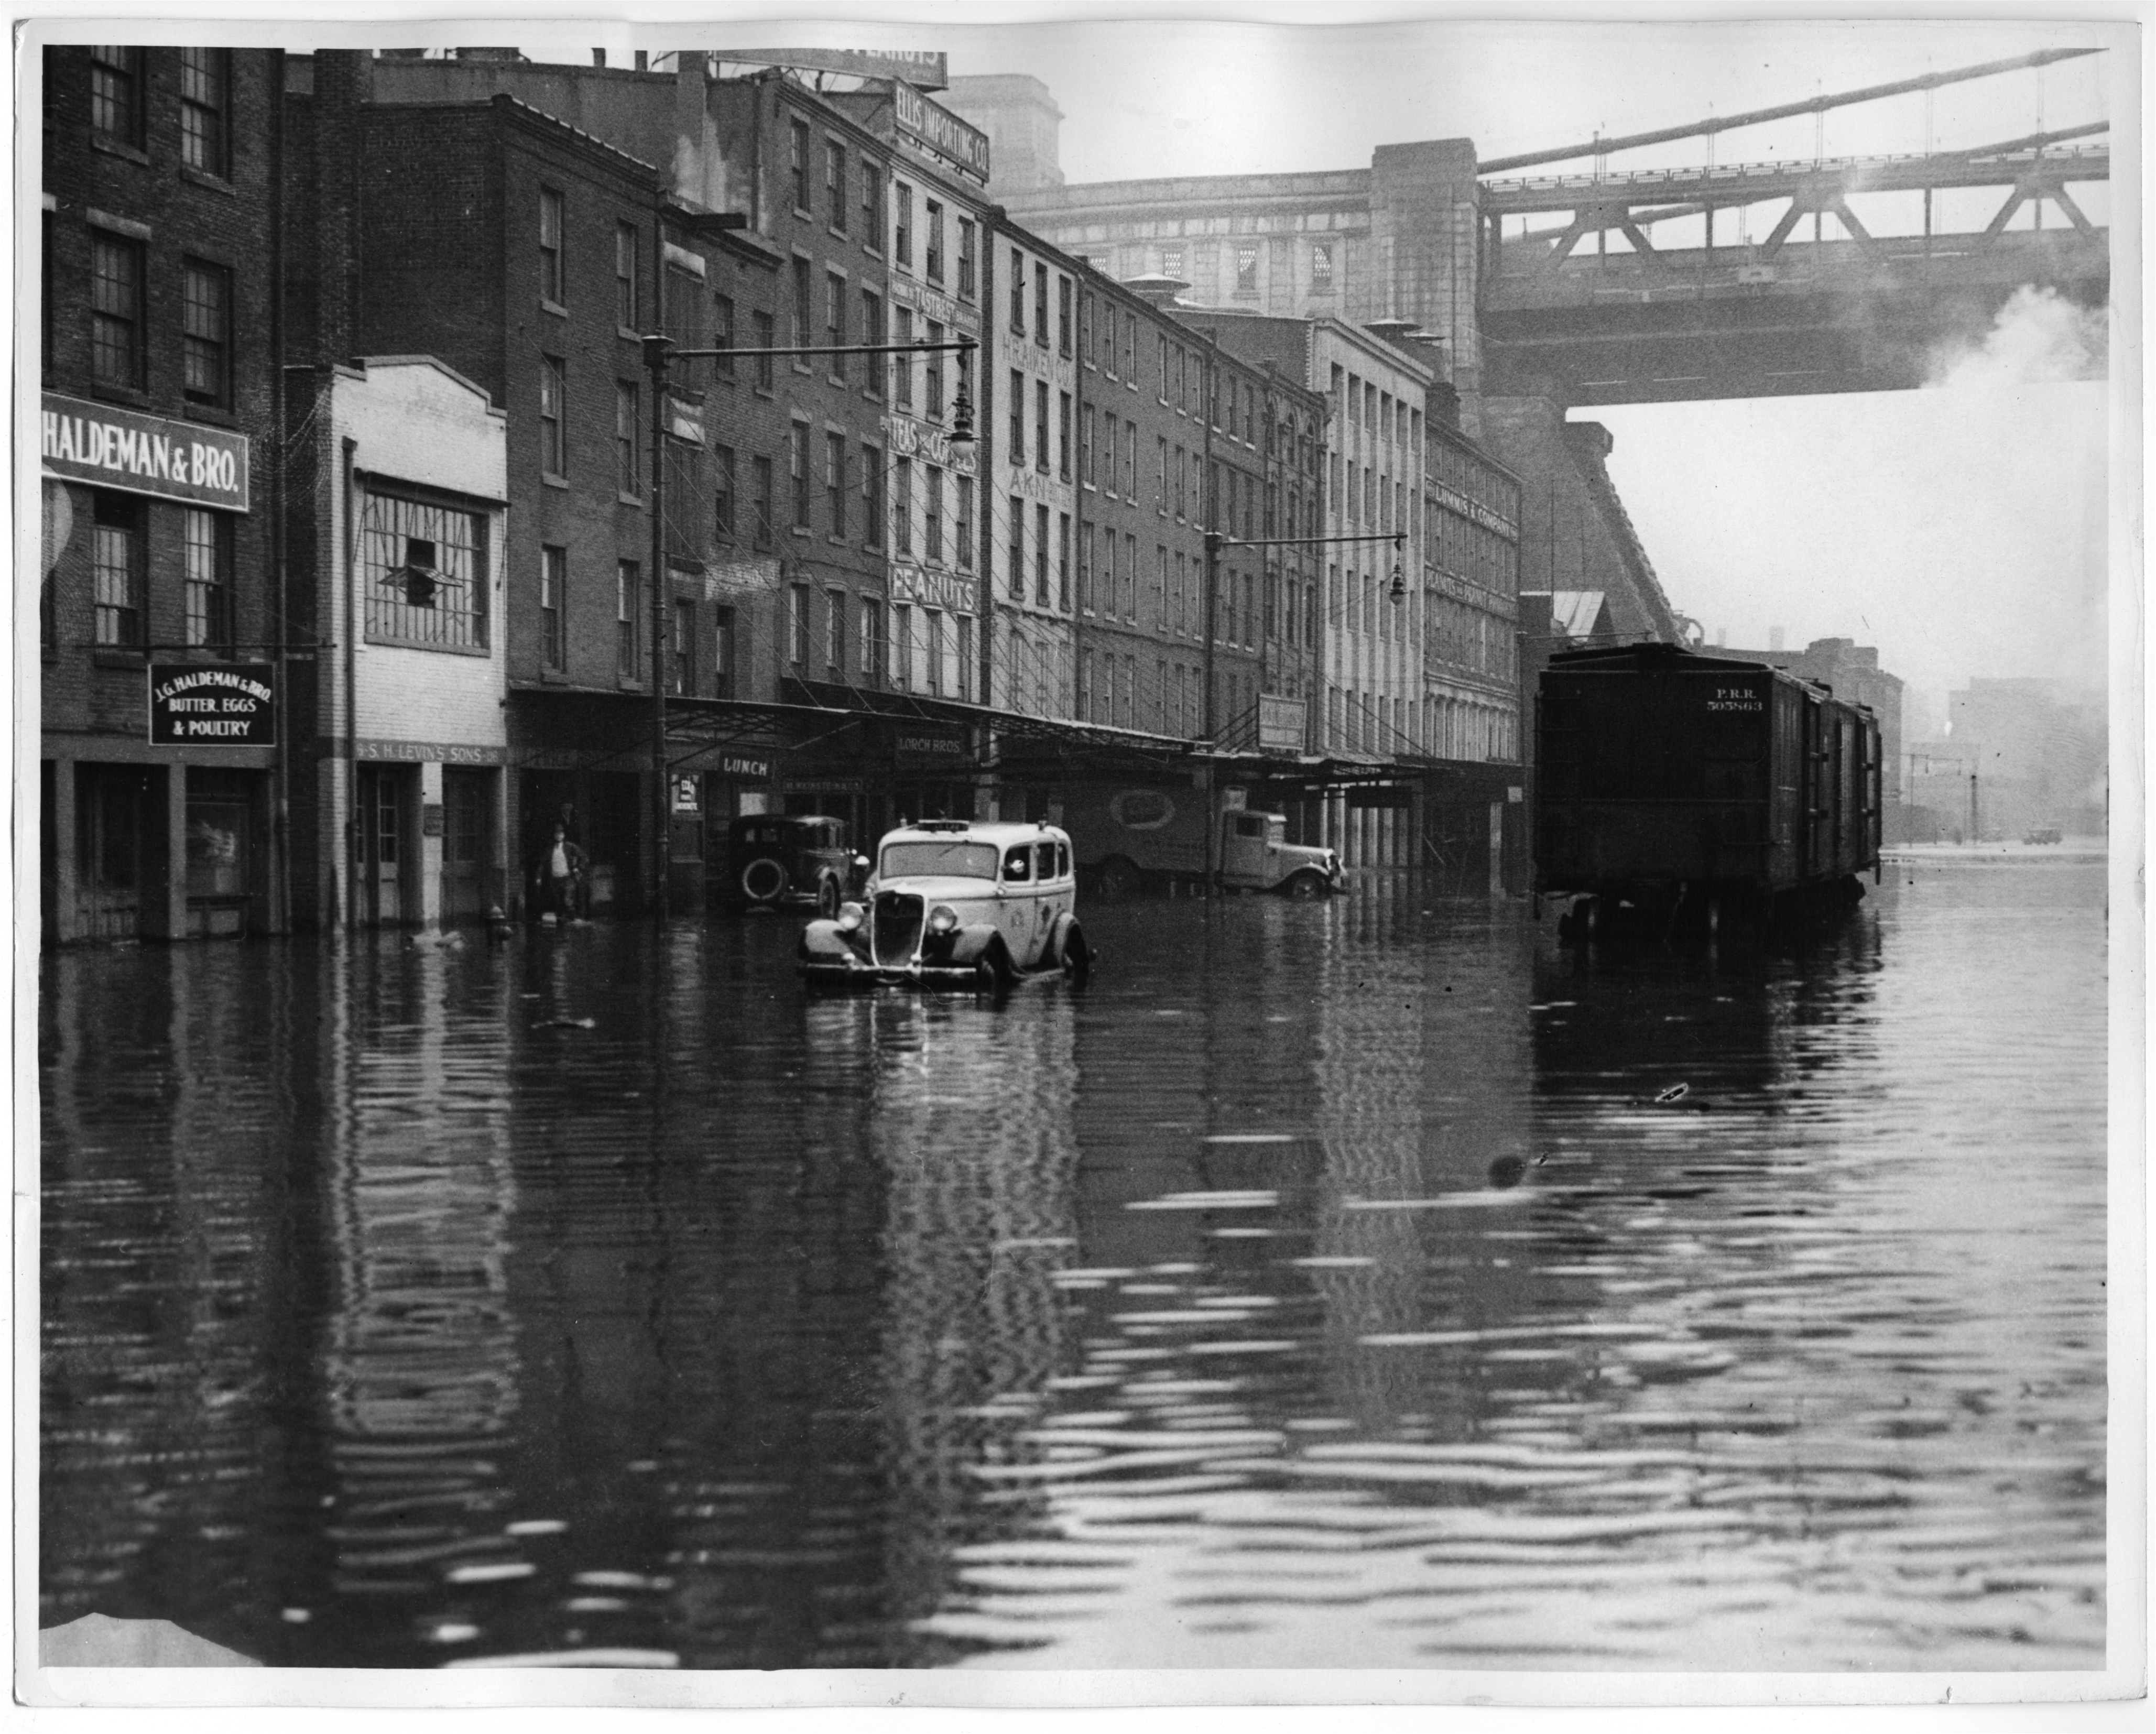 Delaware Avenue flood, Record Number: 748 Collection: Philadelphia Record Photograph Morgue [V07], Folder Number: FF 994 Reproduction restrictions: Unknown Address: 116 Delaware Avenue, Philadelphia, PA 19106, USA Date of Original: 1930s